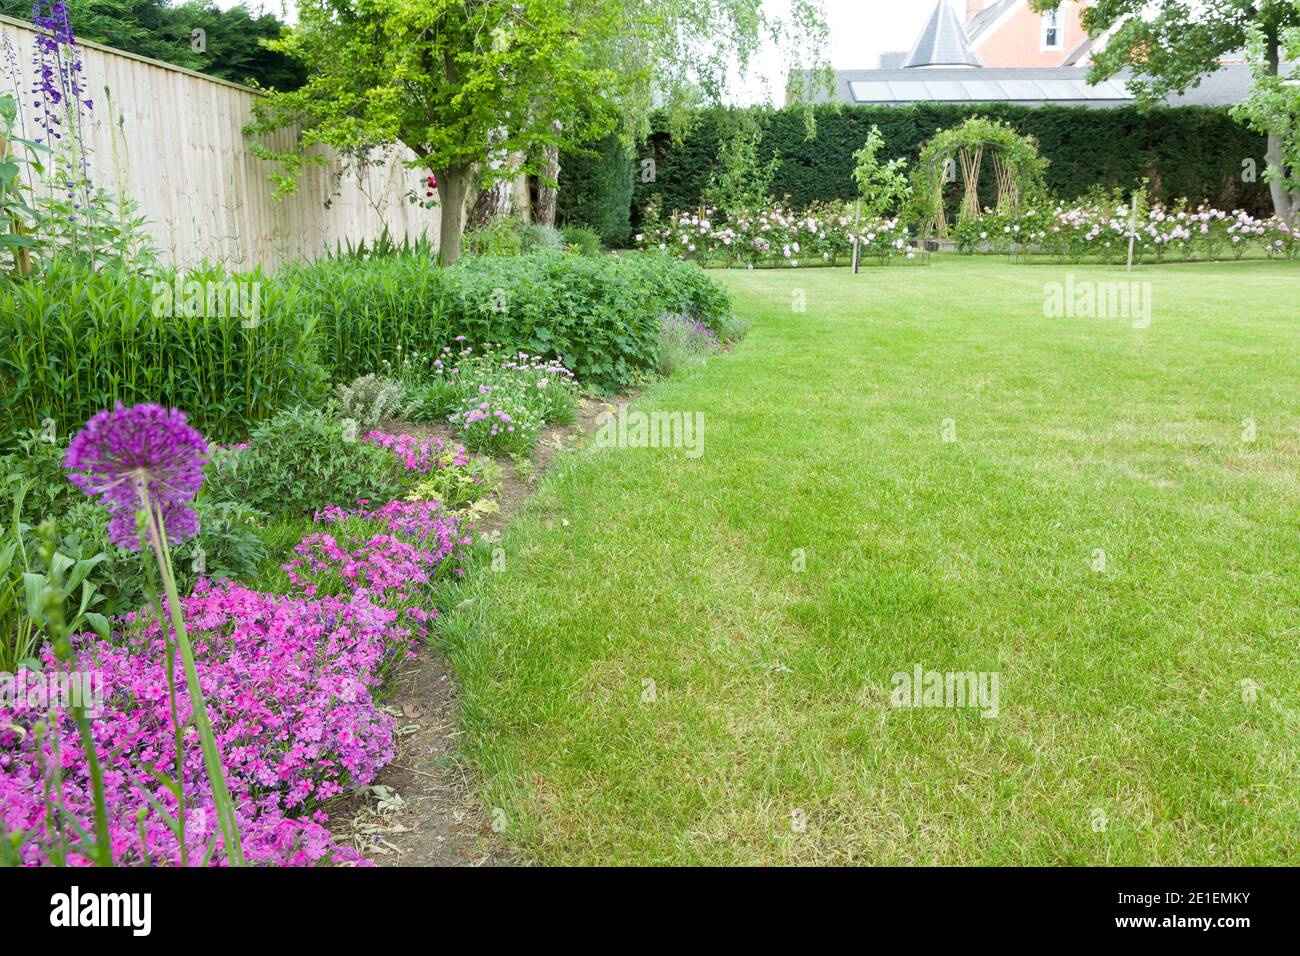 Large English garden in early summer or late spring with flowers in border and lawn. Example of landscaped garden design and gardening, UK Stock Photo